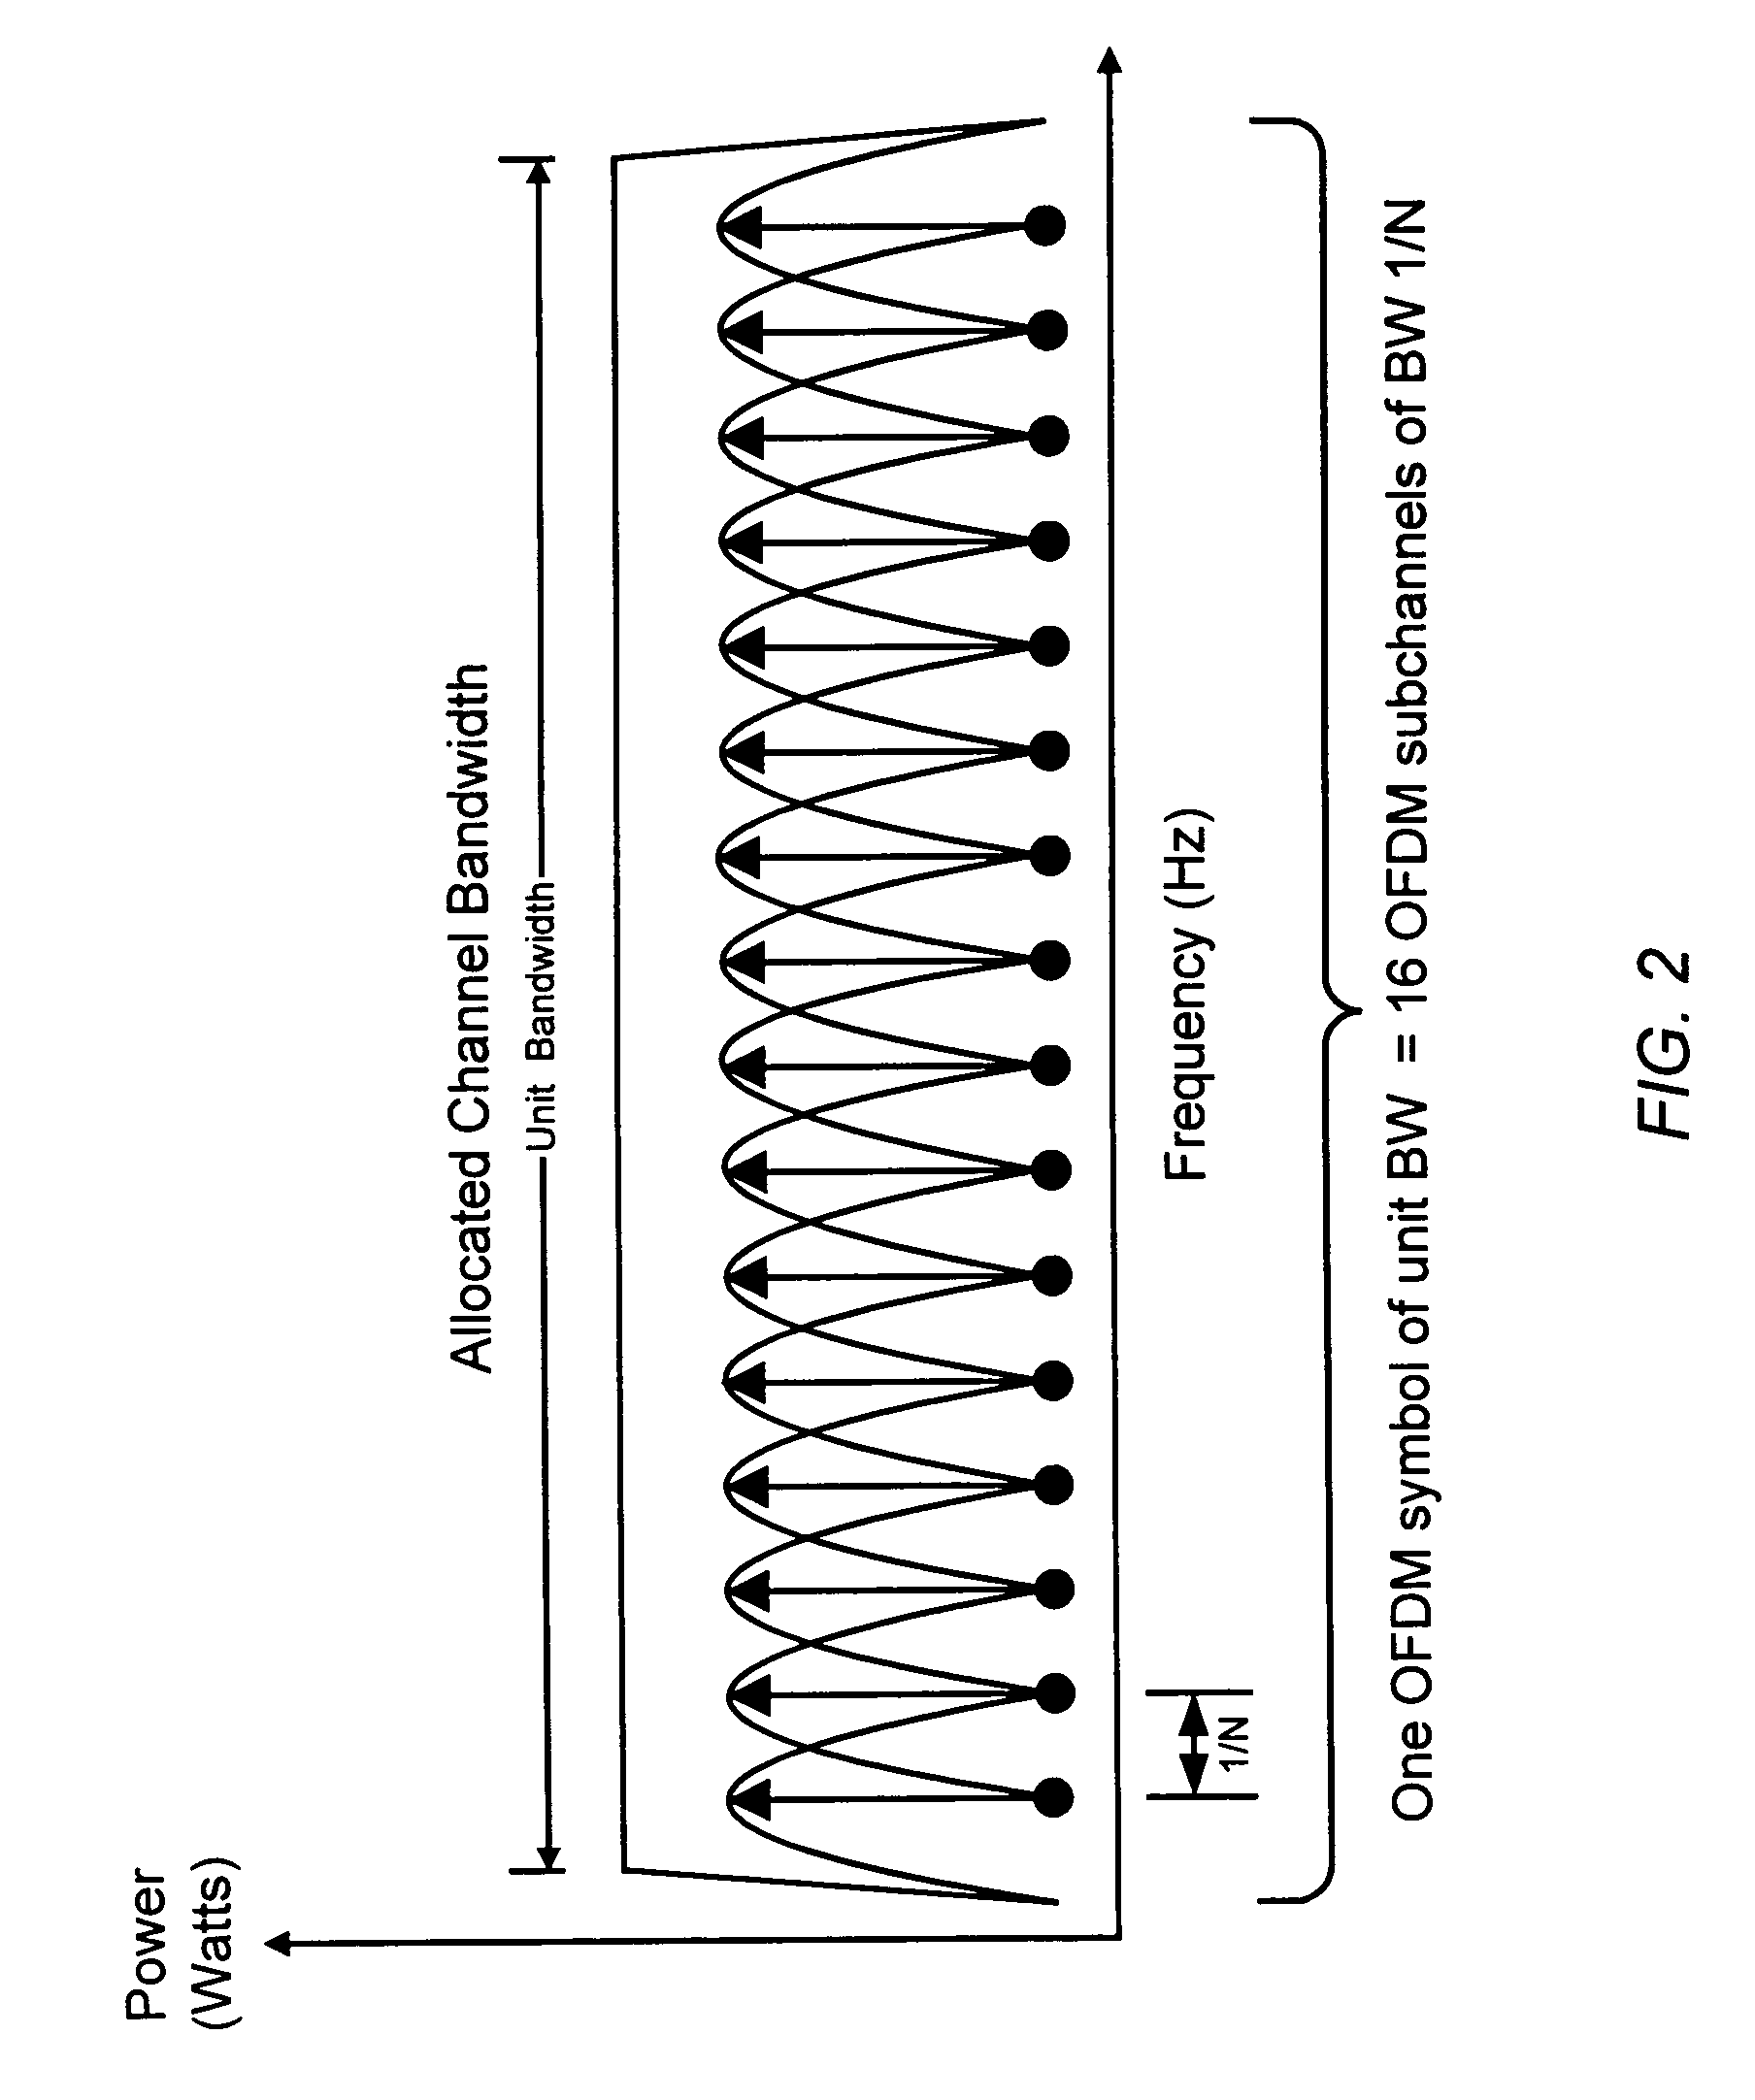 SINR measurement method for OFDM communications systems